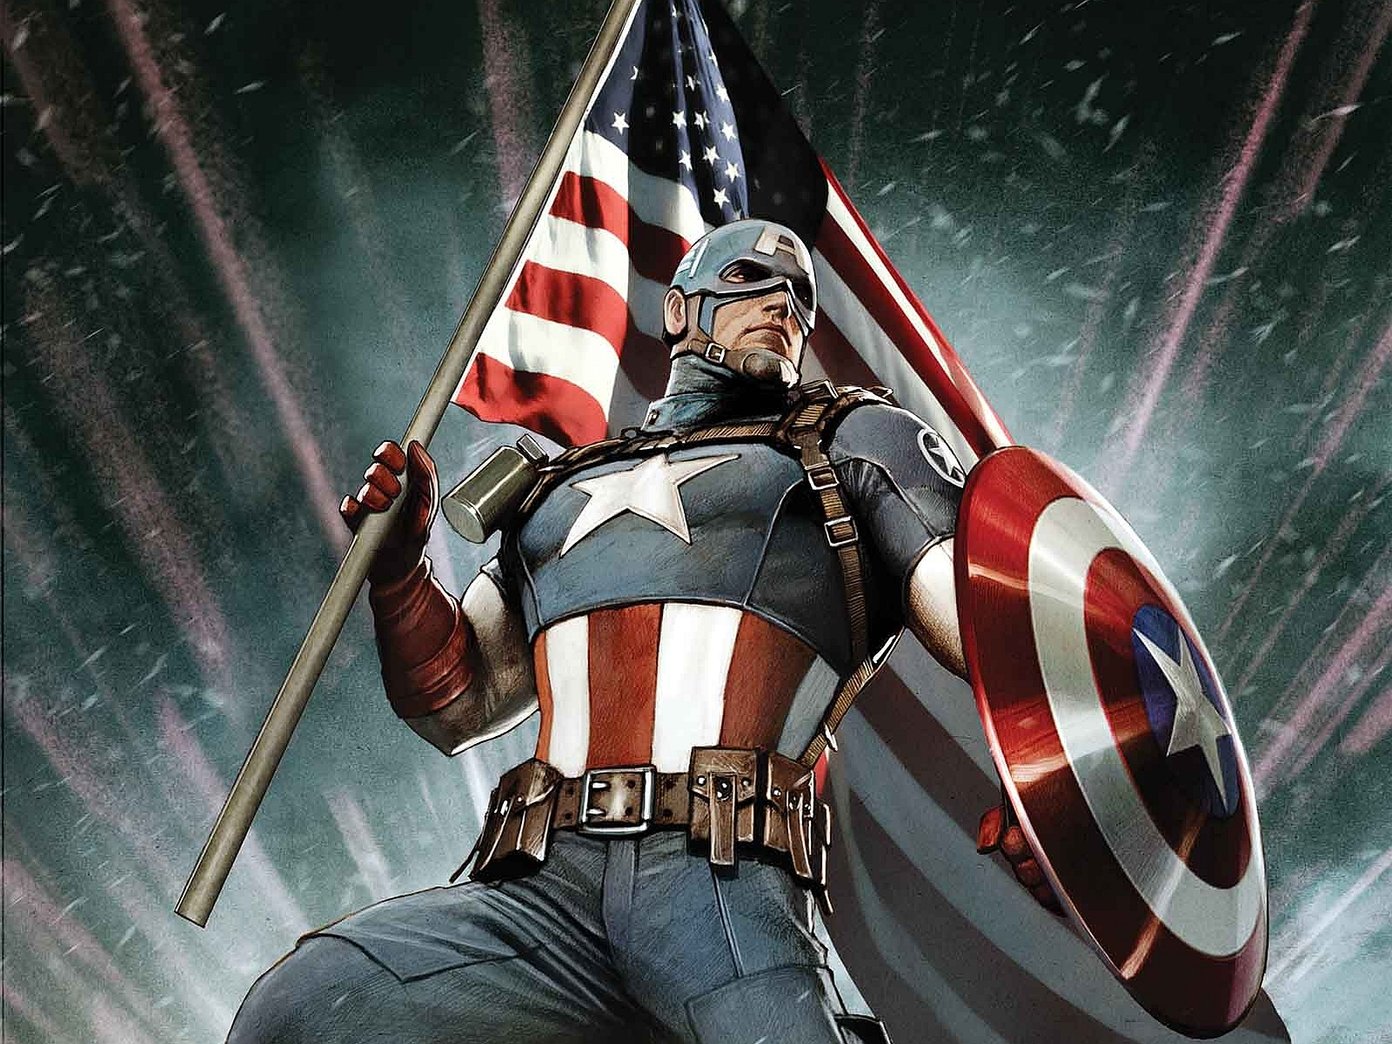 Top Captain America Wallpaper In HD That You Must